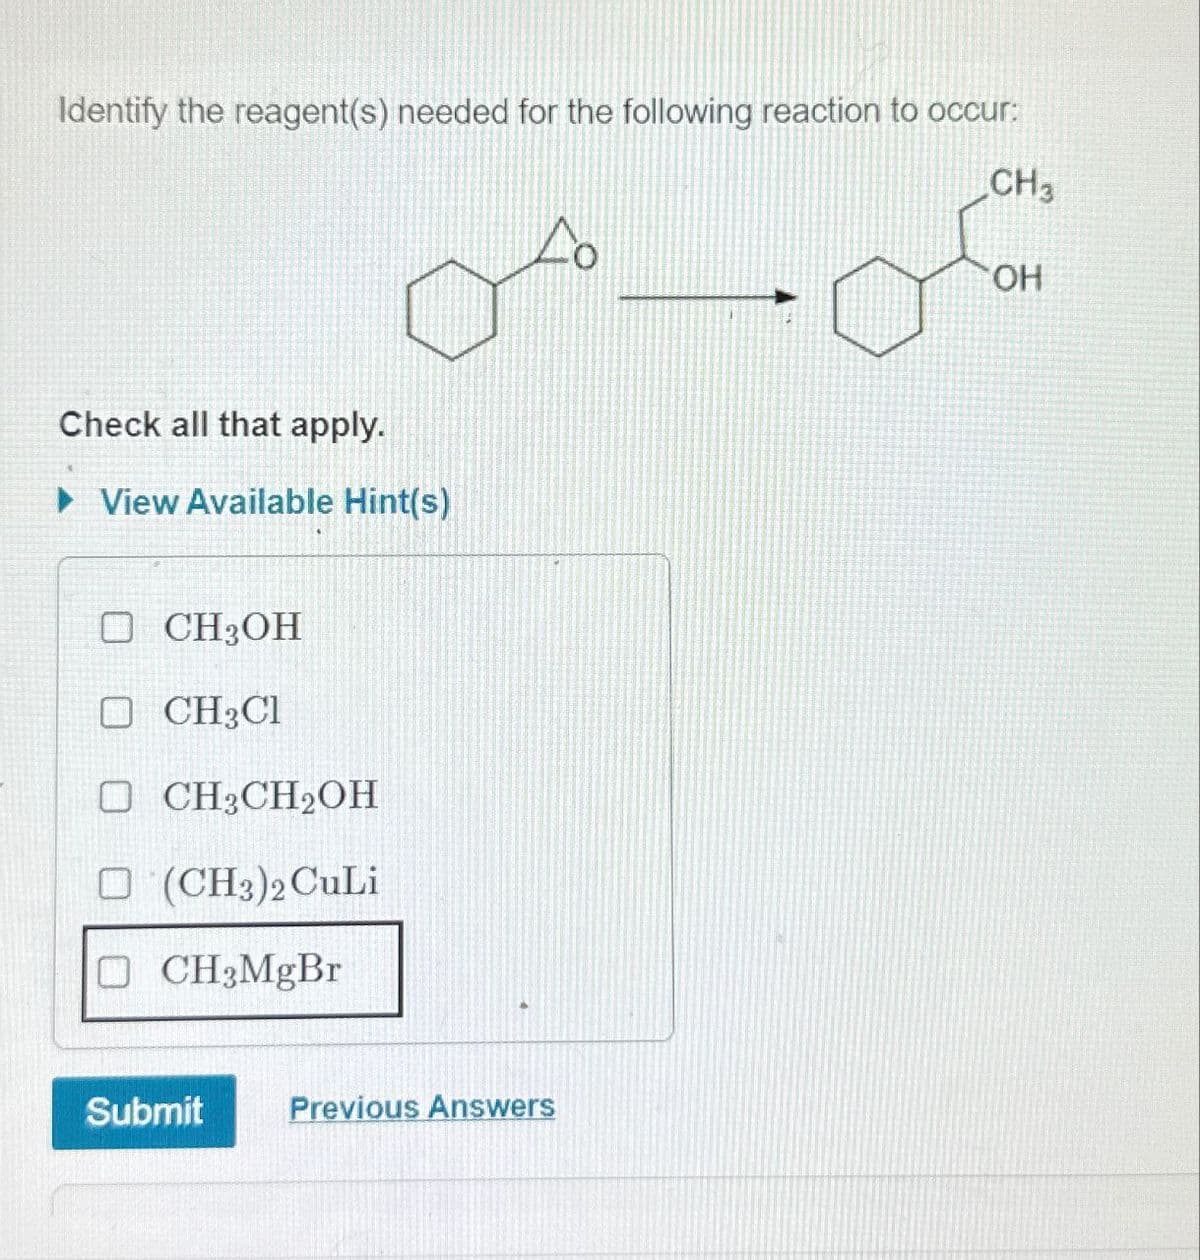 Identify the reagent(s) needed for the following reaction to occur:
Check all that apply.
▸ View Available Hint(s)
□ CH3OH
☐ CH3Cl
O CH3CH2OH
O(CH3)2 CuLi
CH3MgBr
Submit
Previous Answers
CH3
OH